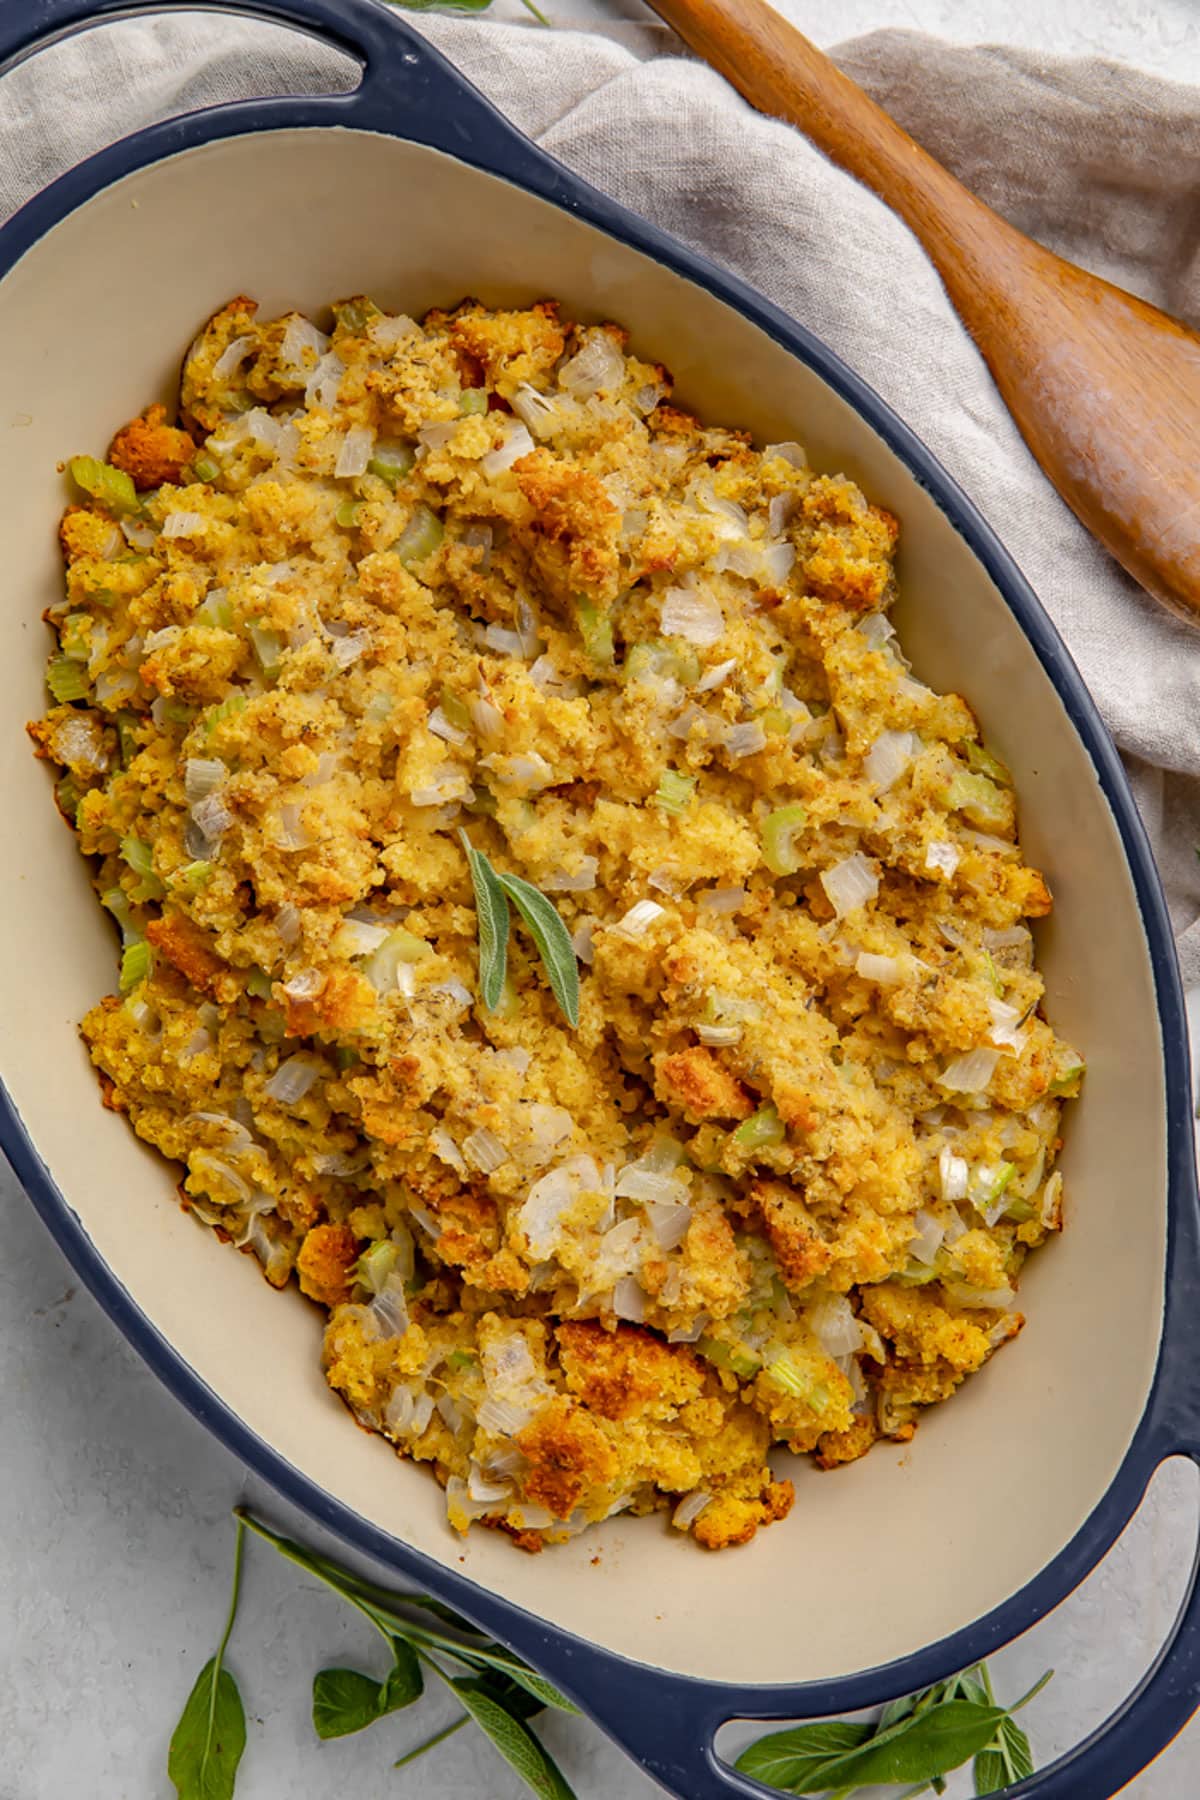 Overhead view of cornbread stuffing in a large blue casserole dish.